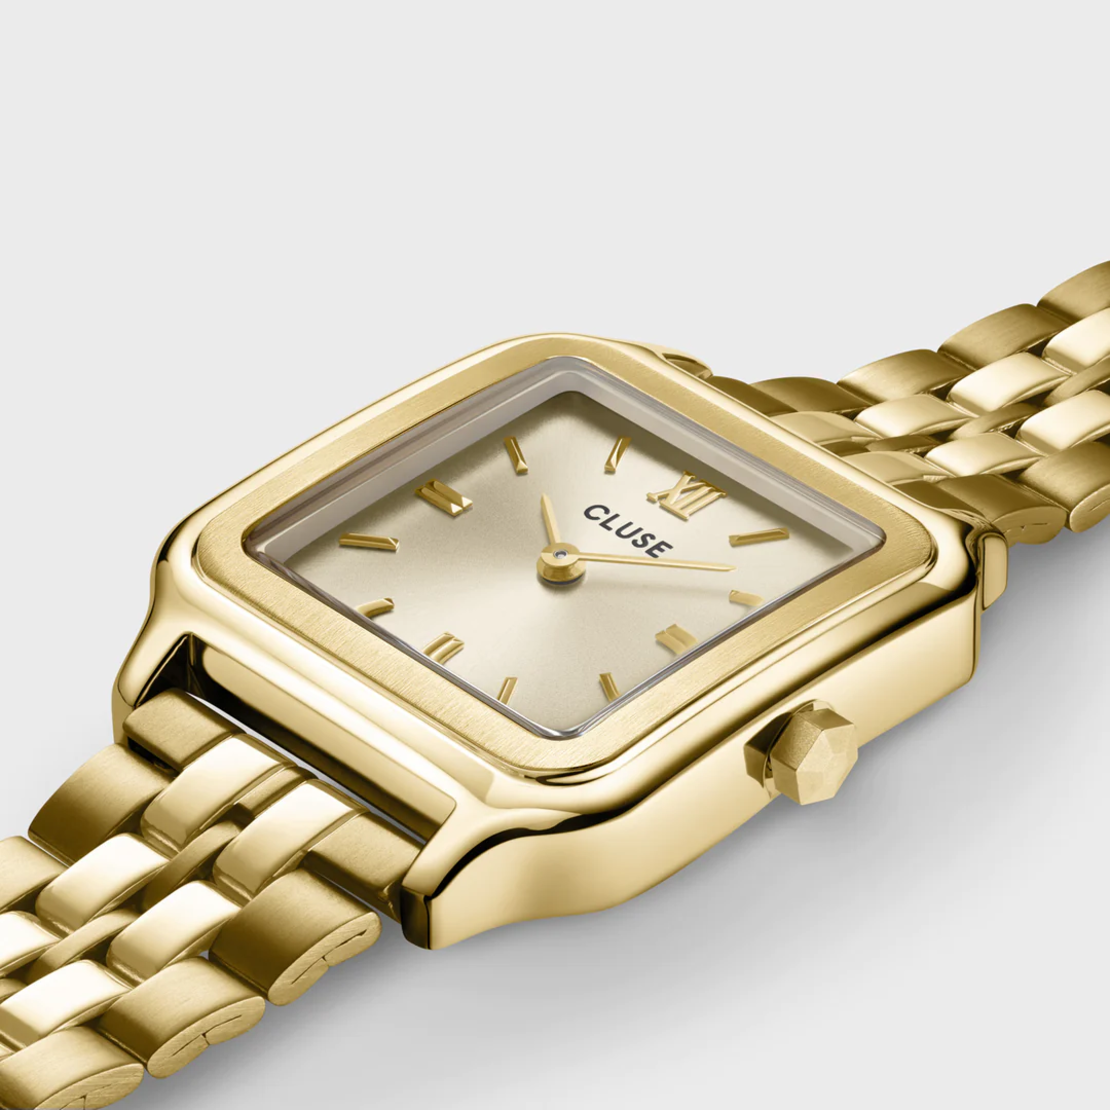 Gracieuse Watch Steel, Gold Colour